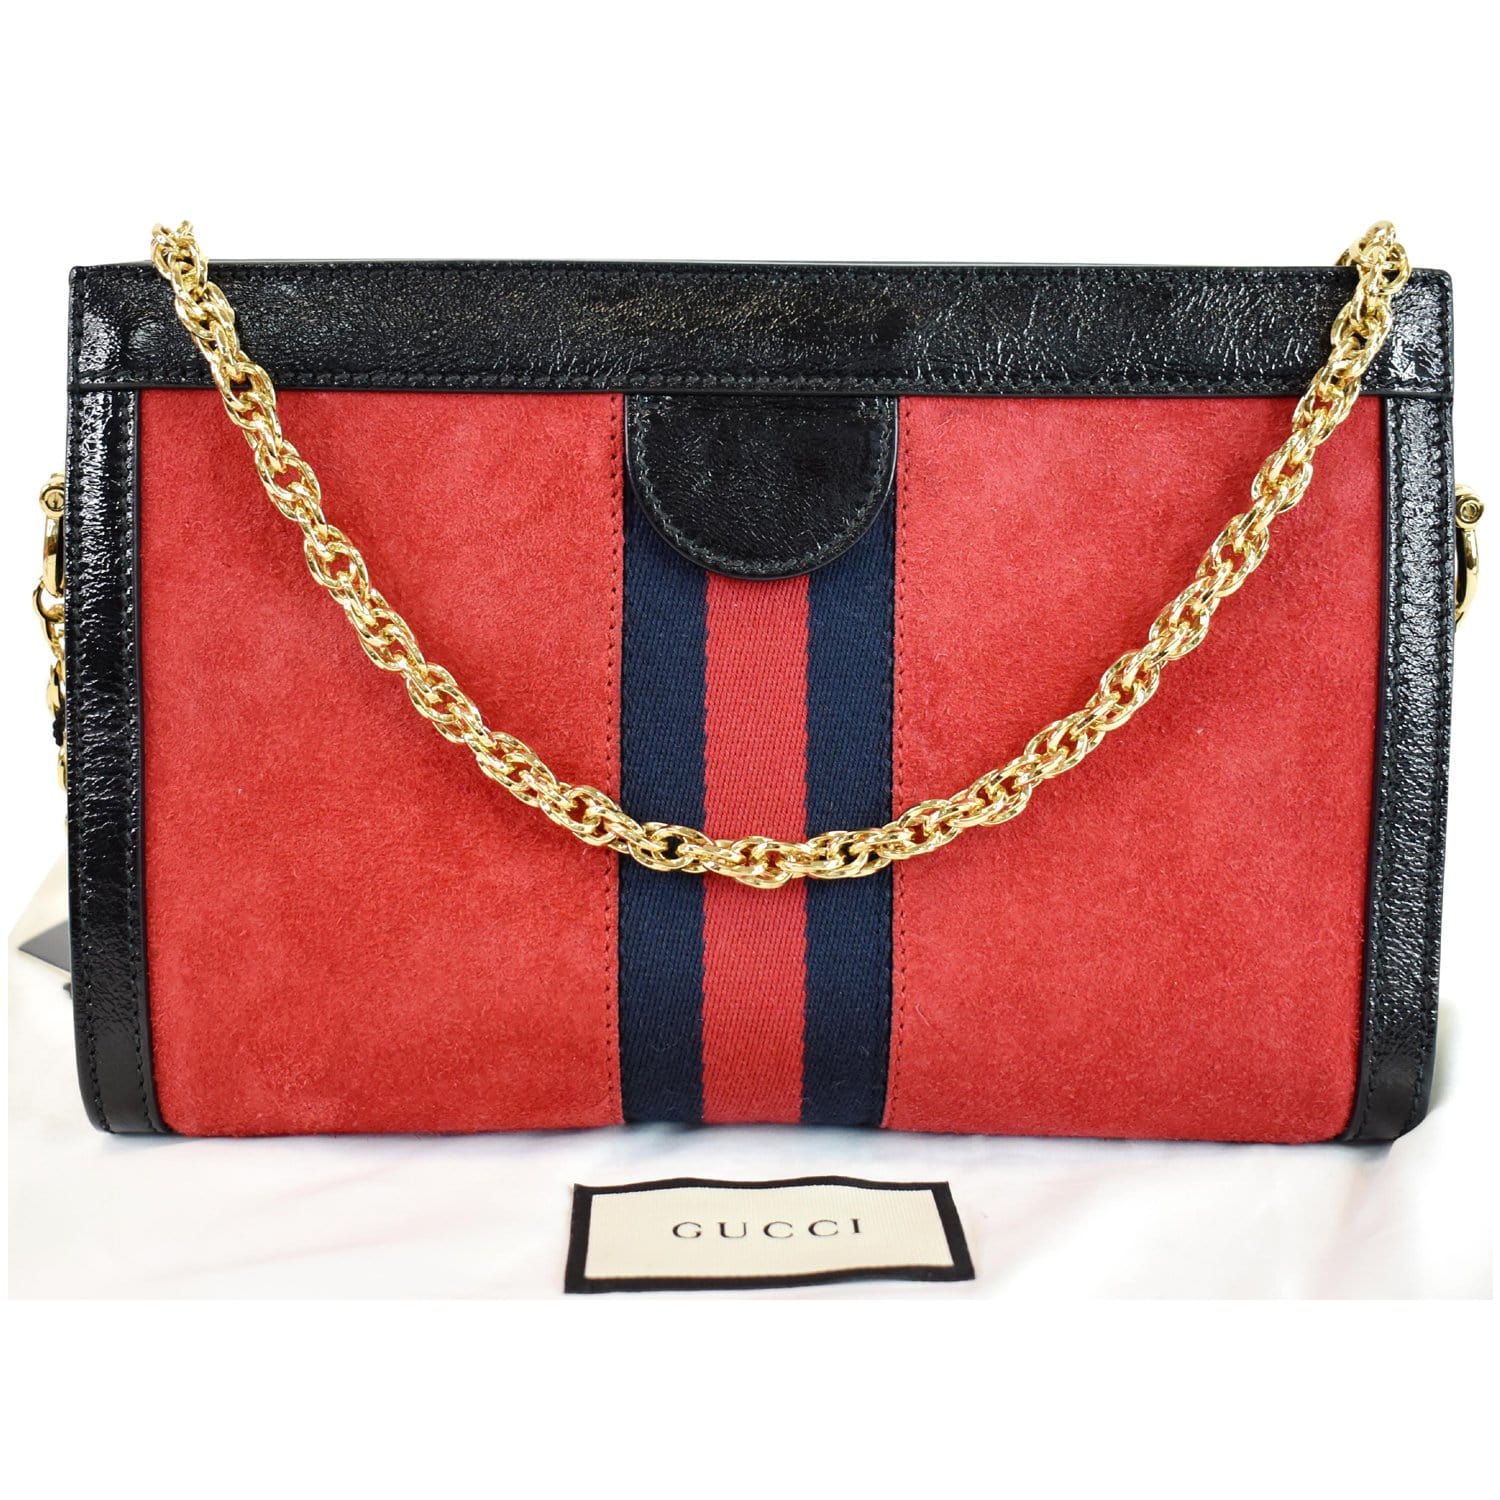 Ophidia GG Small Shoulder Bag in Multicoloured - Gucci